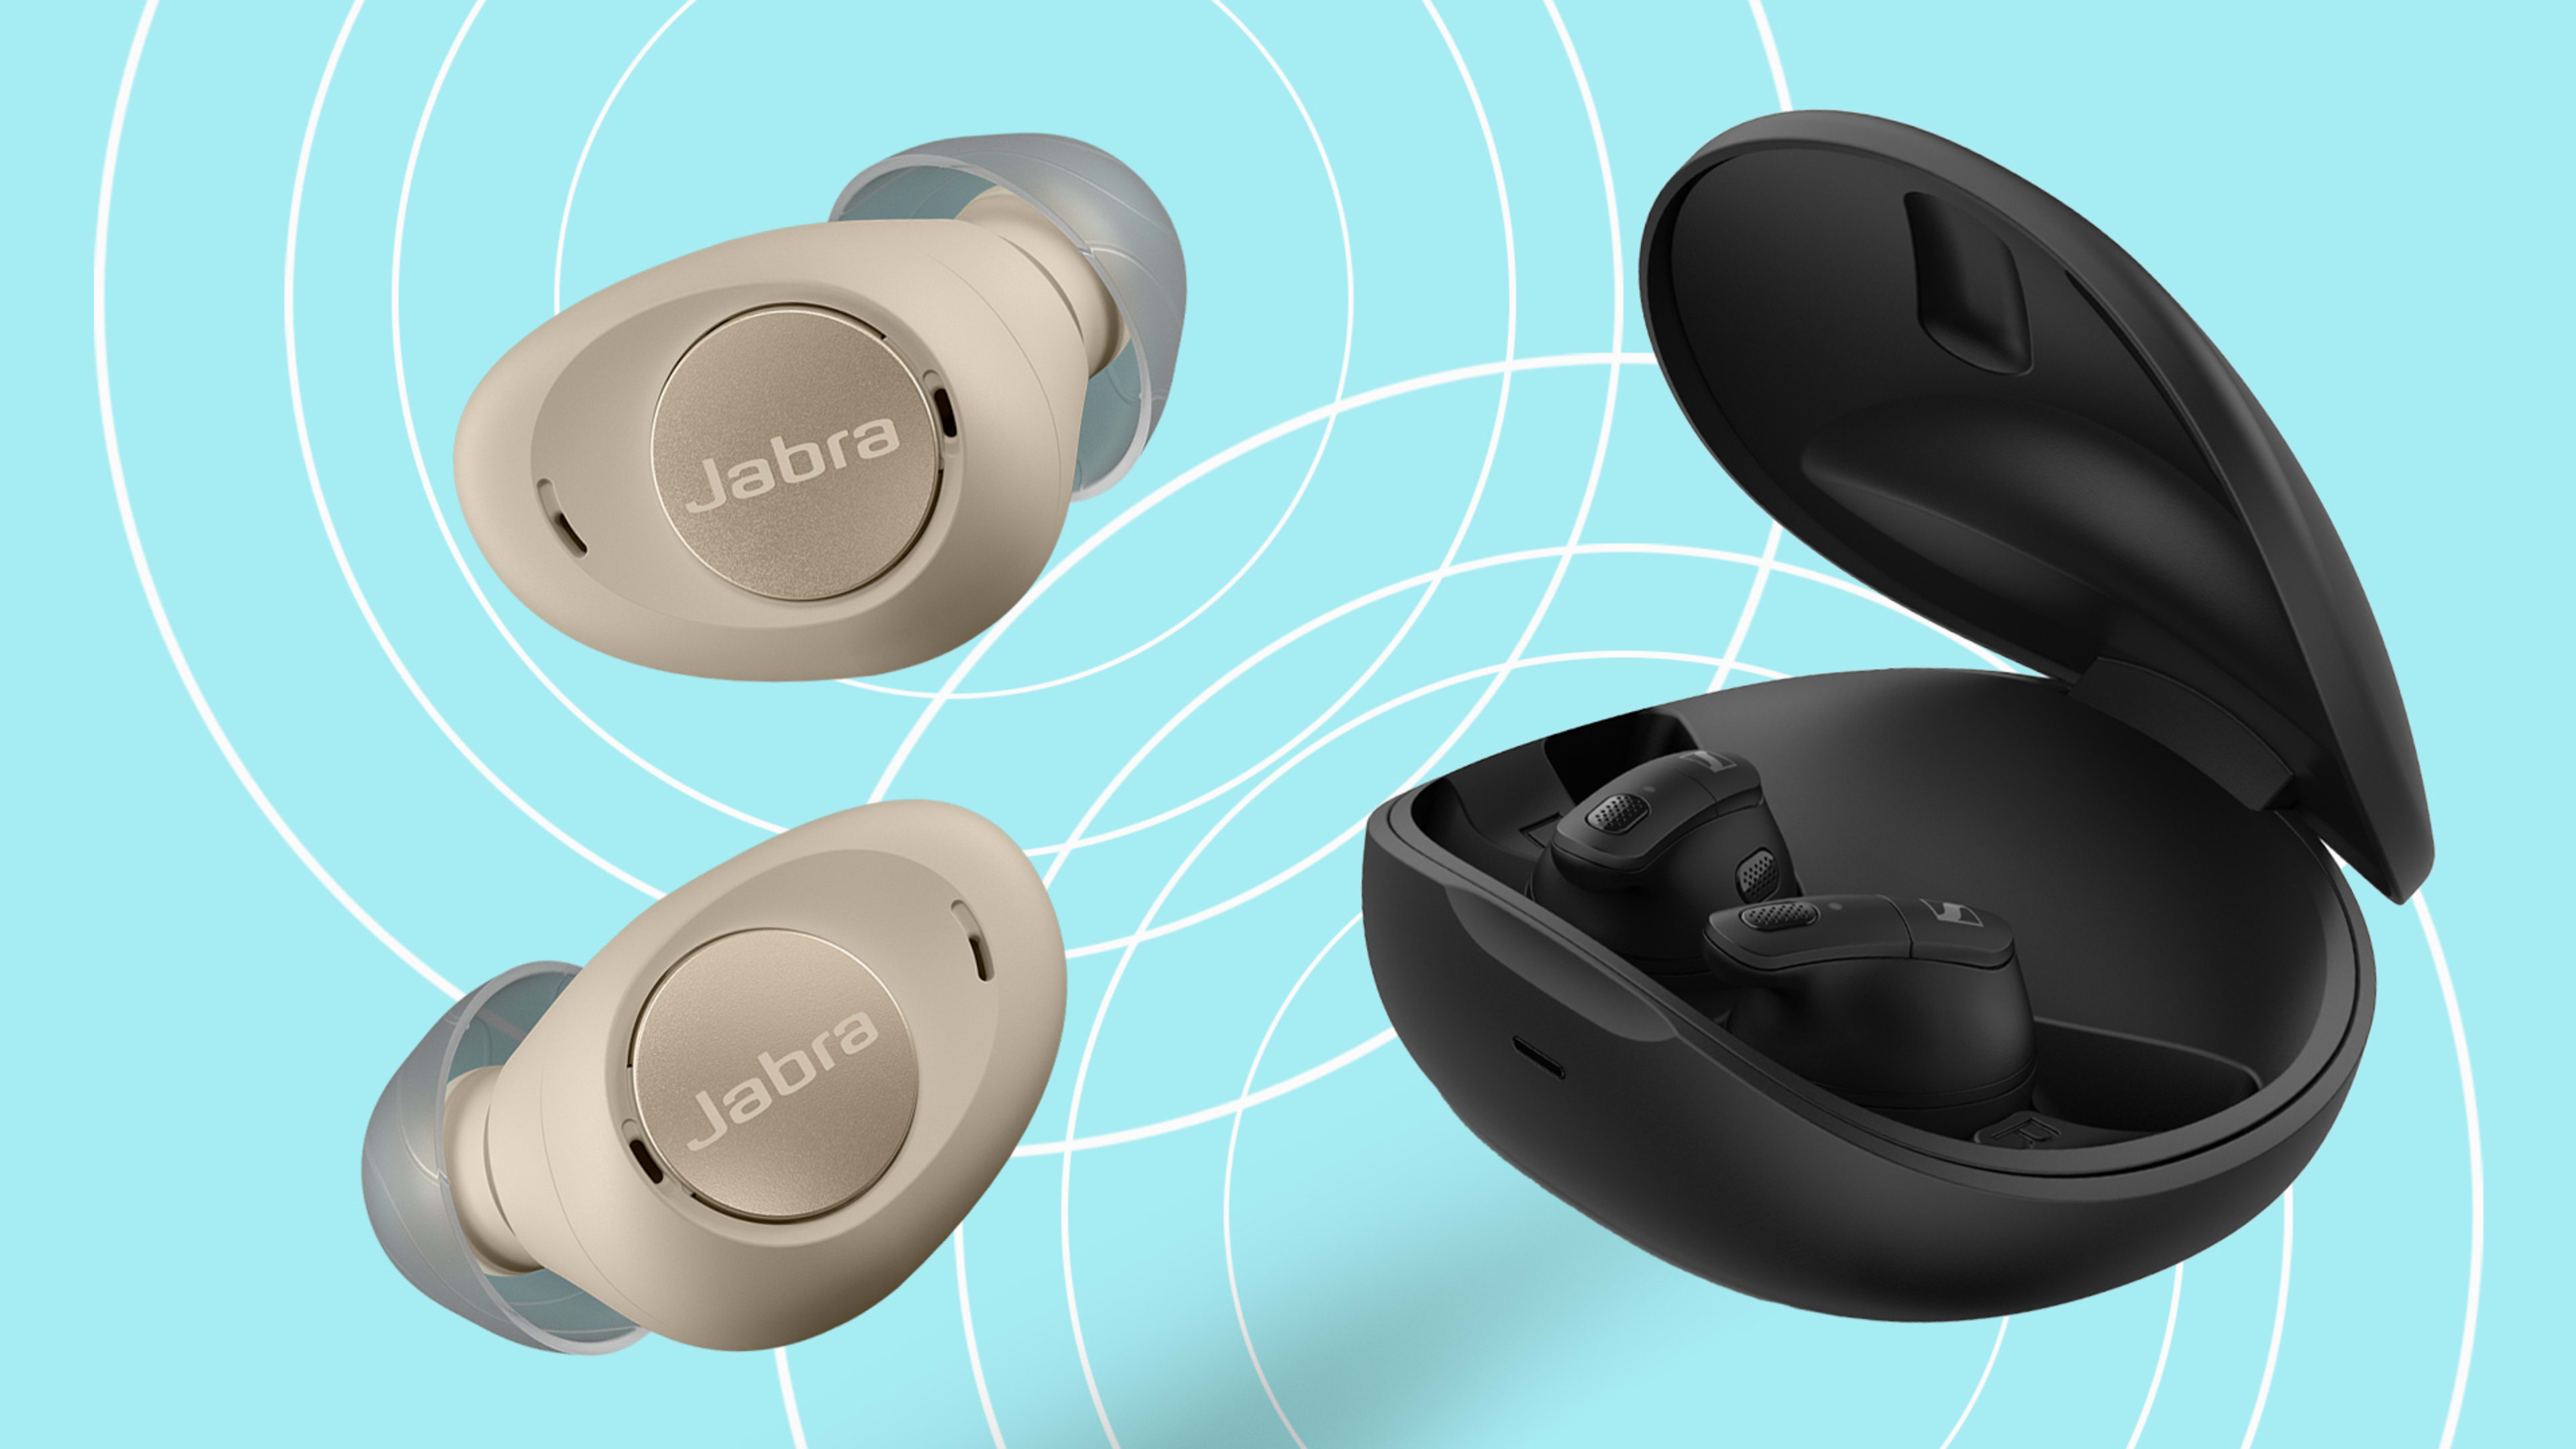 The seismic shift that has brands like Sony and Sennheiser disrupting the hearing aids market